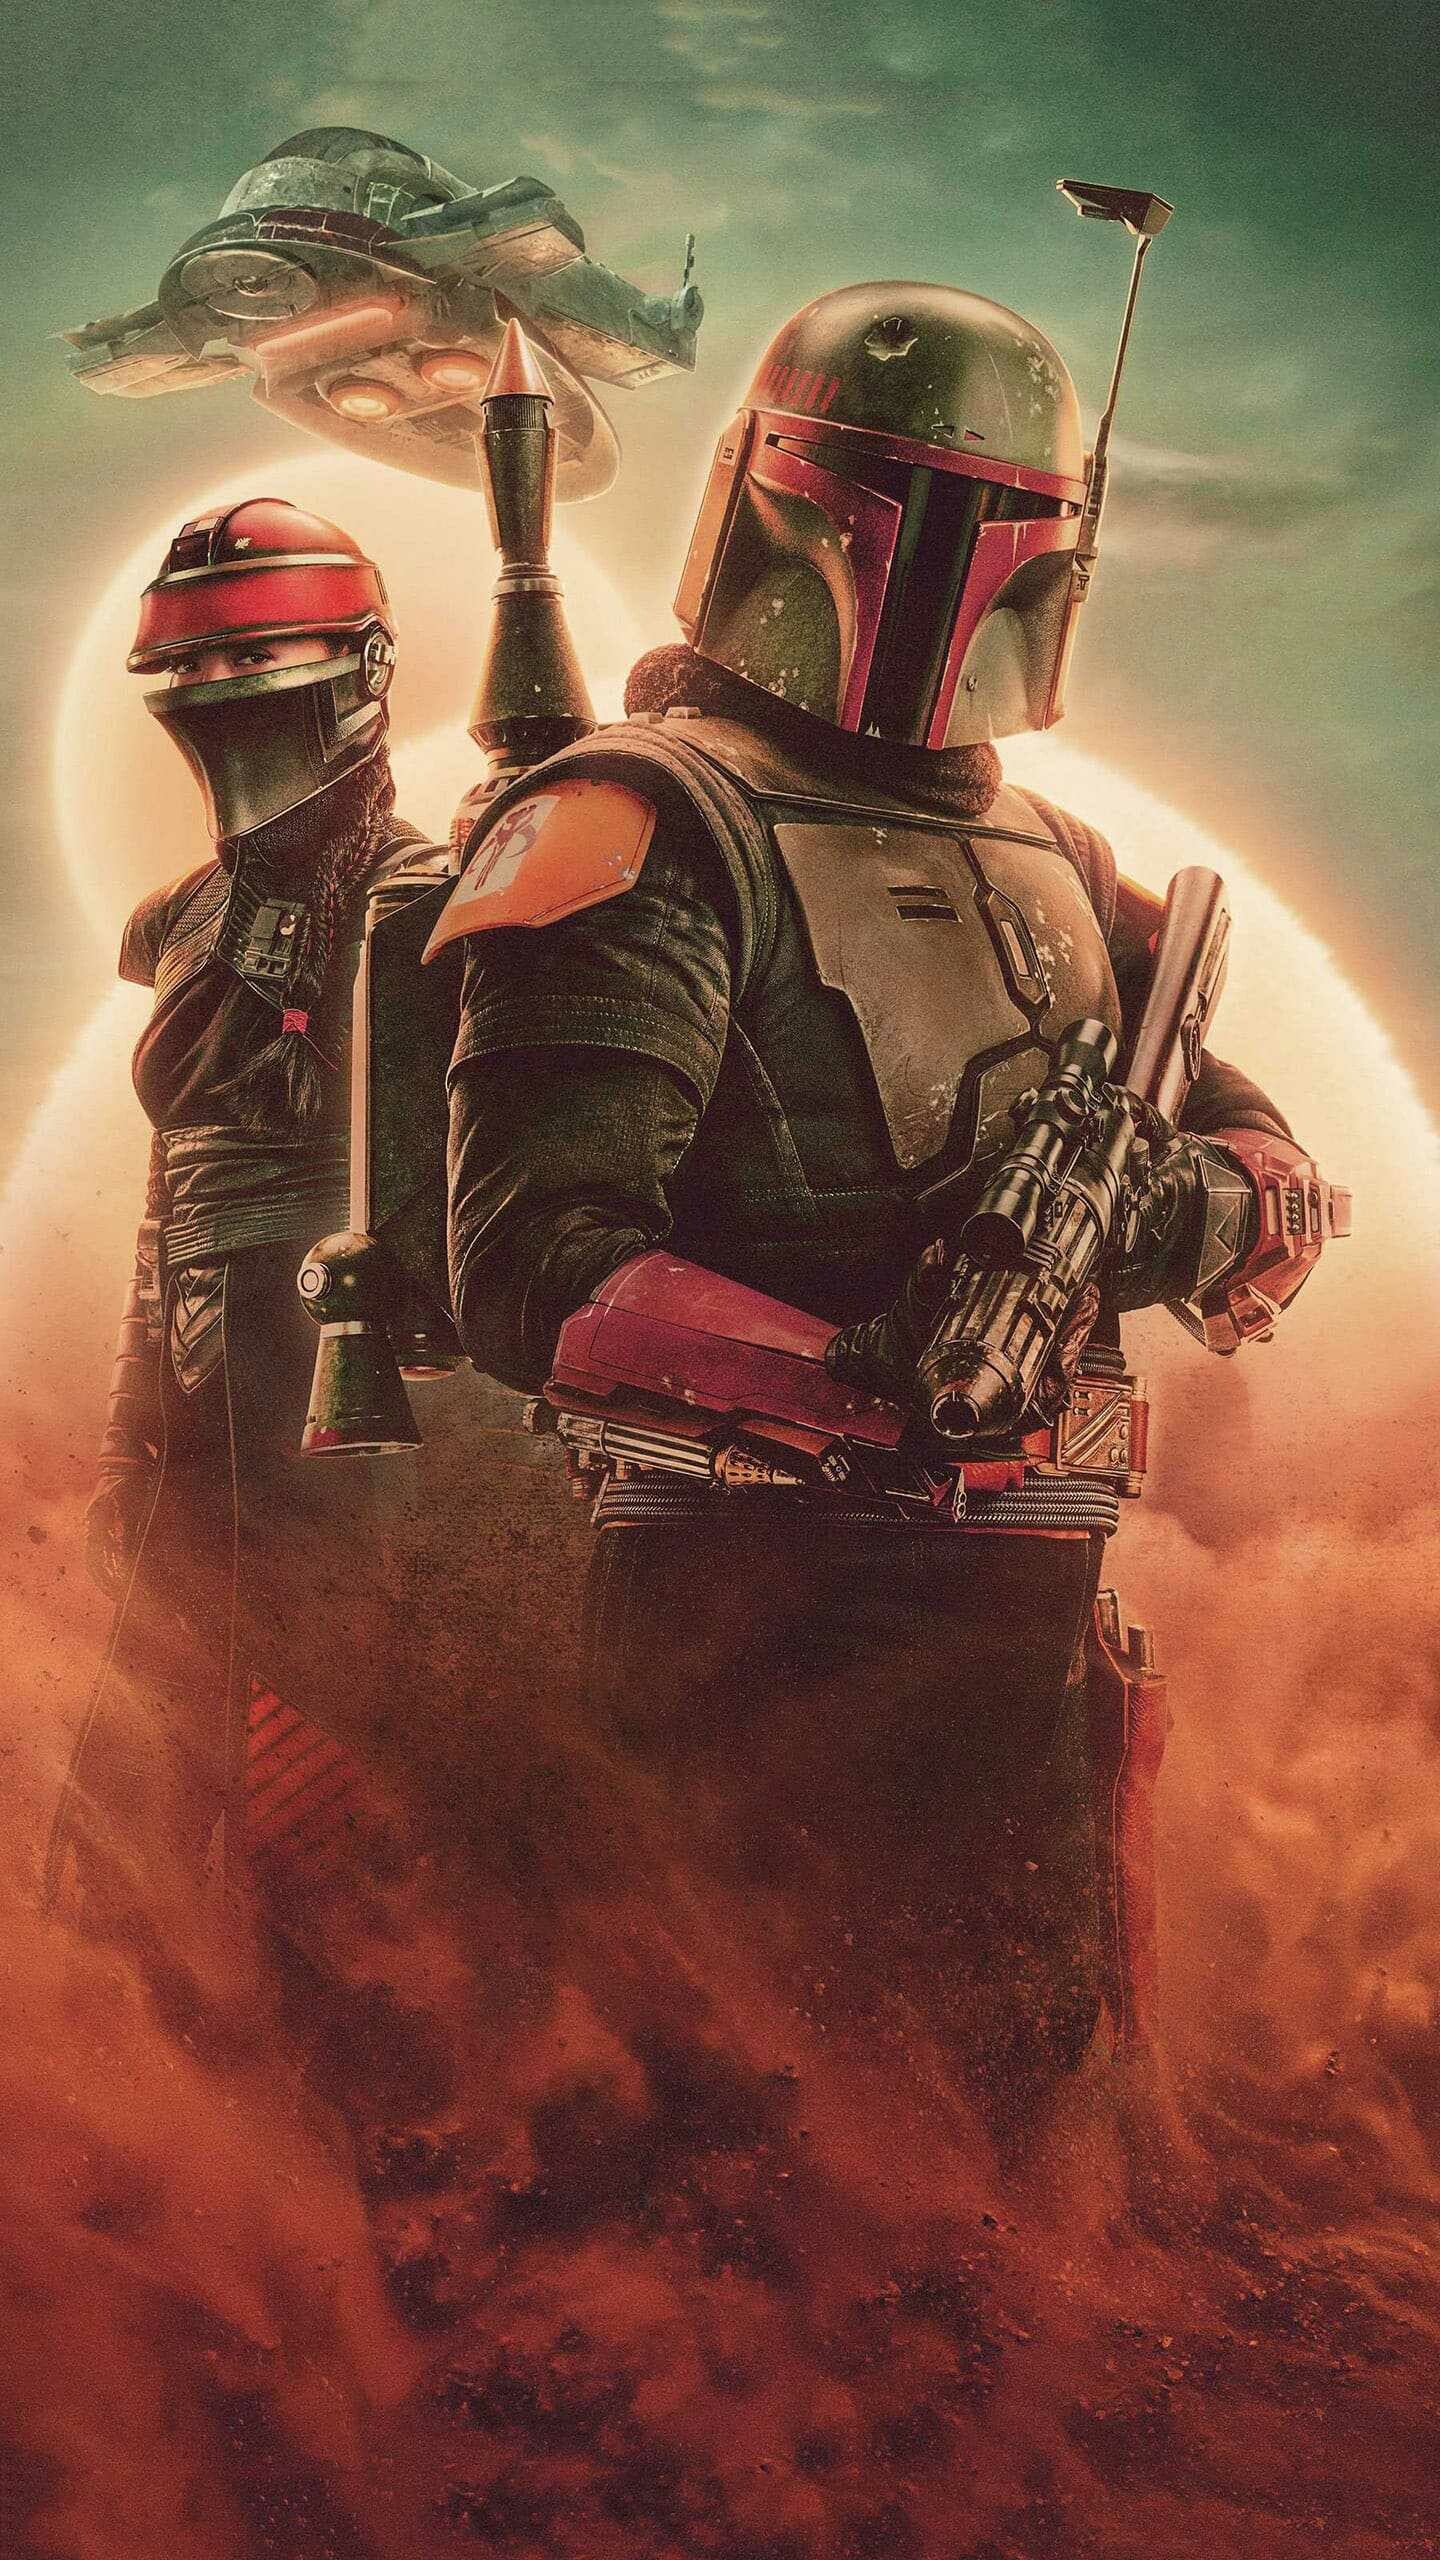 The Book of Boba Fett: A part of the Star Wars franchise, Ran for seven episodes until February 9, 2022. 1440x2560 HD Background.